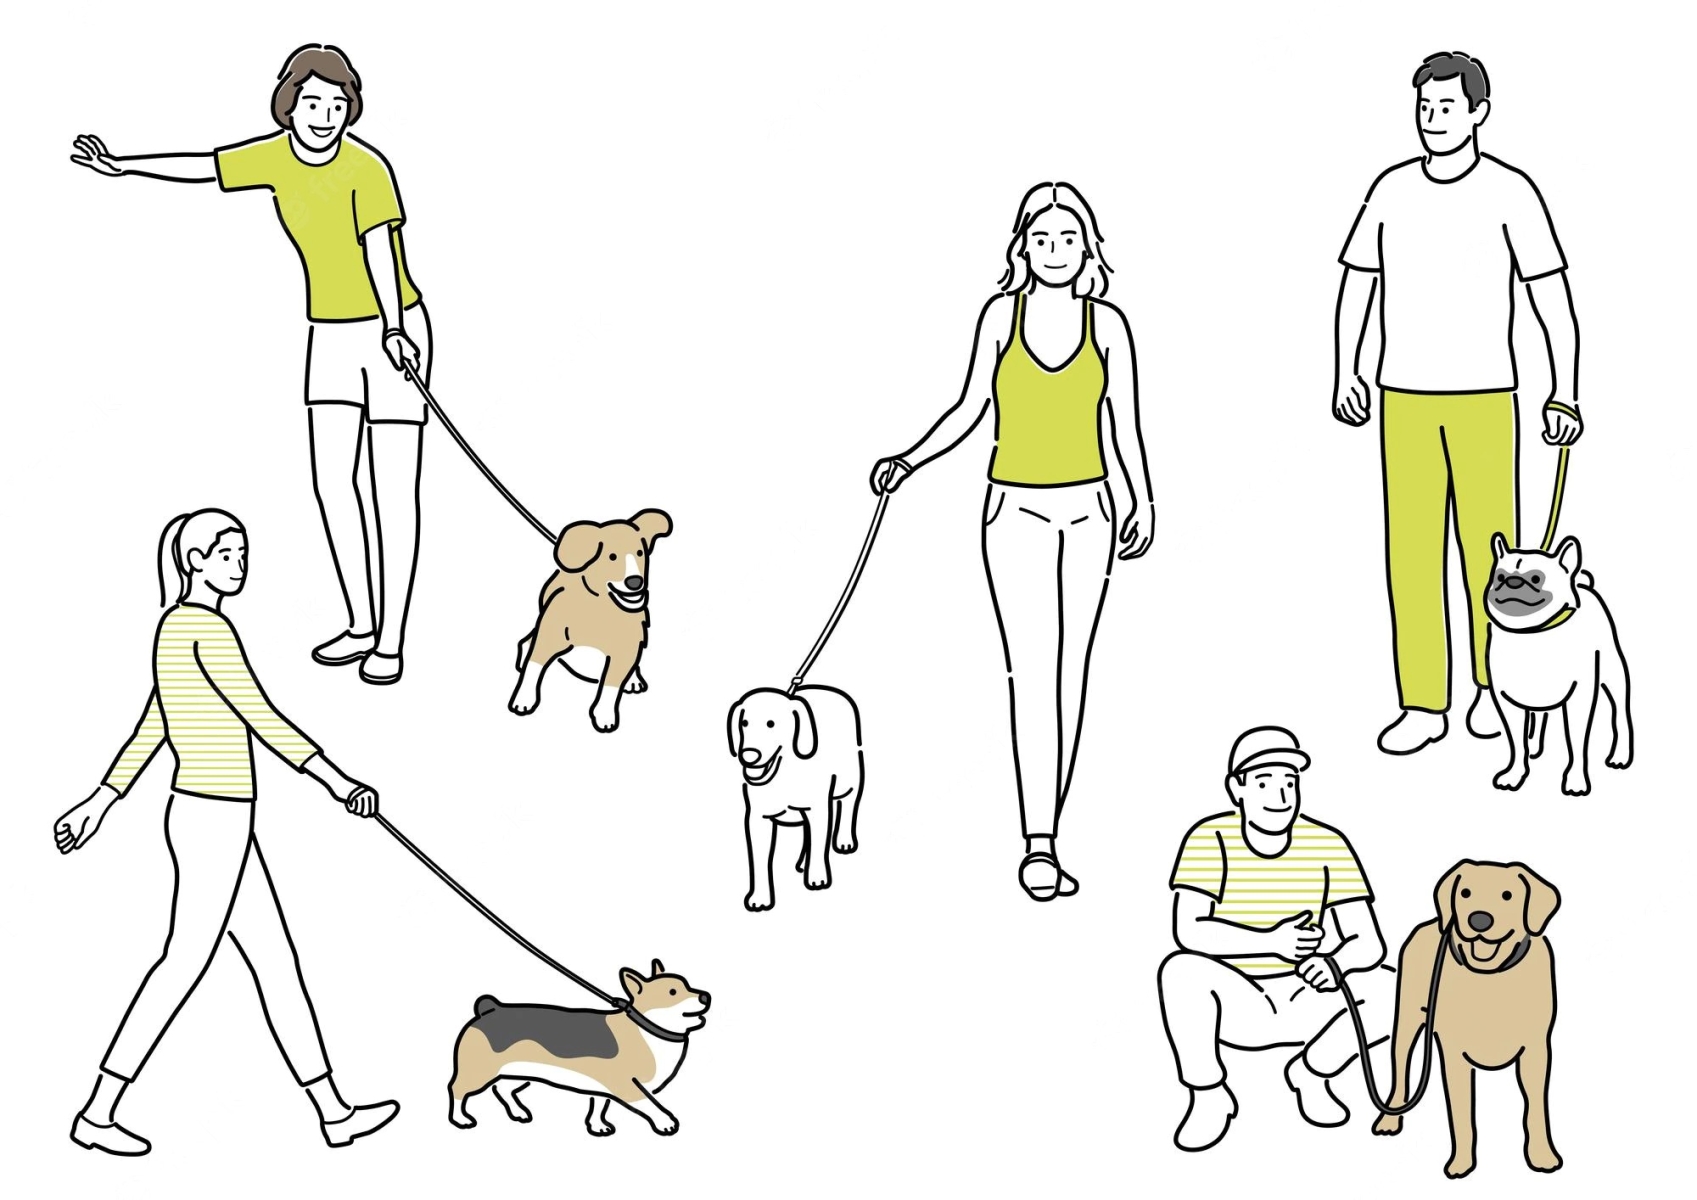 A number of people are walking with their dog.